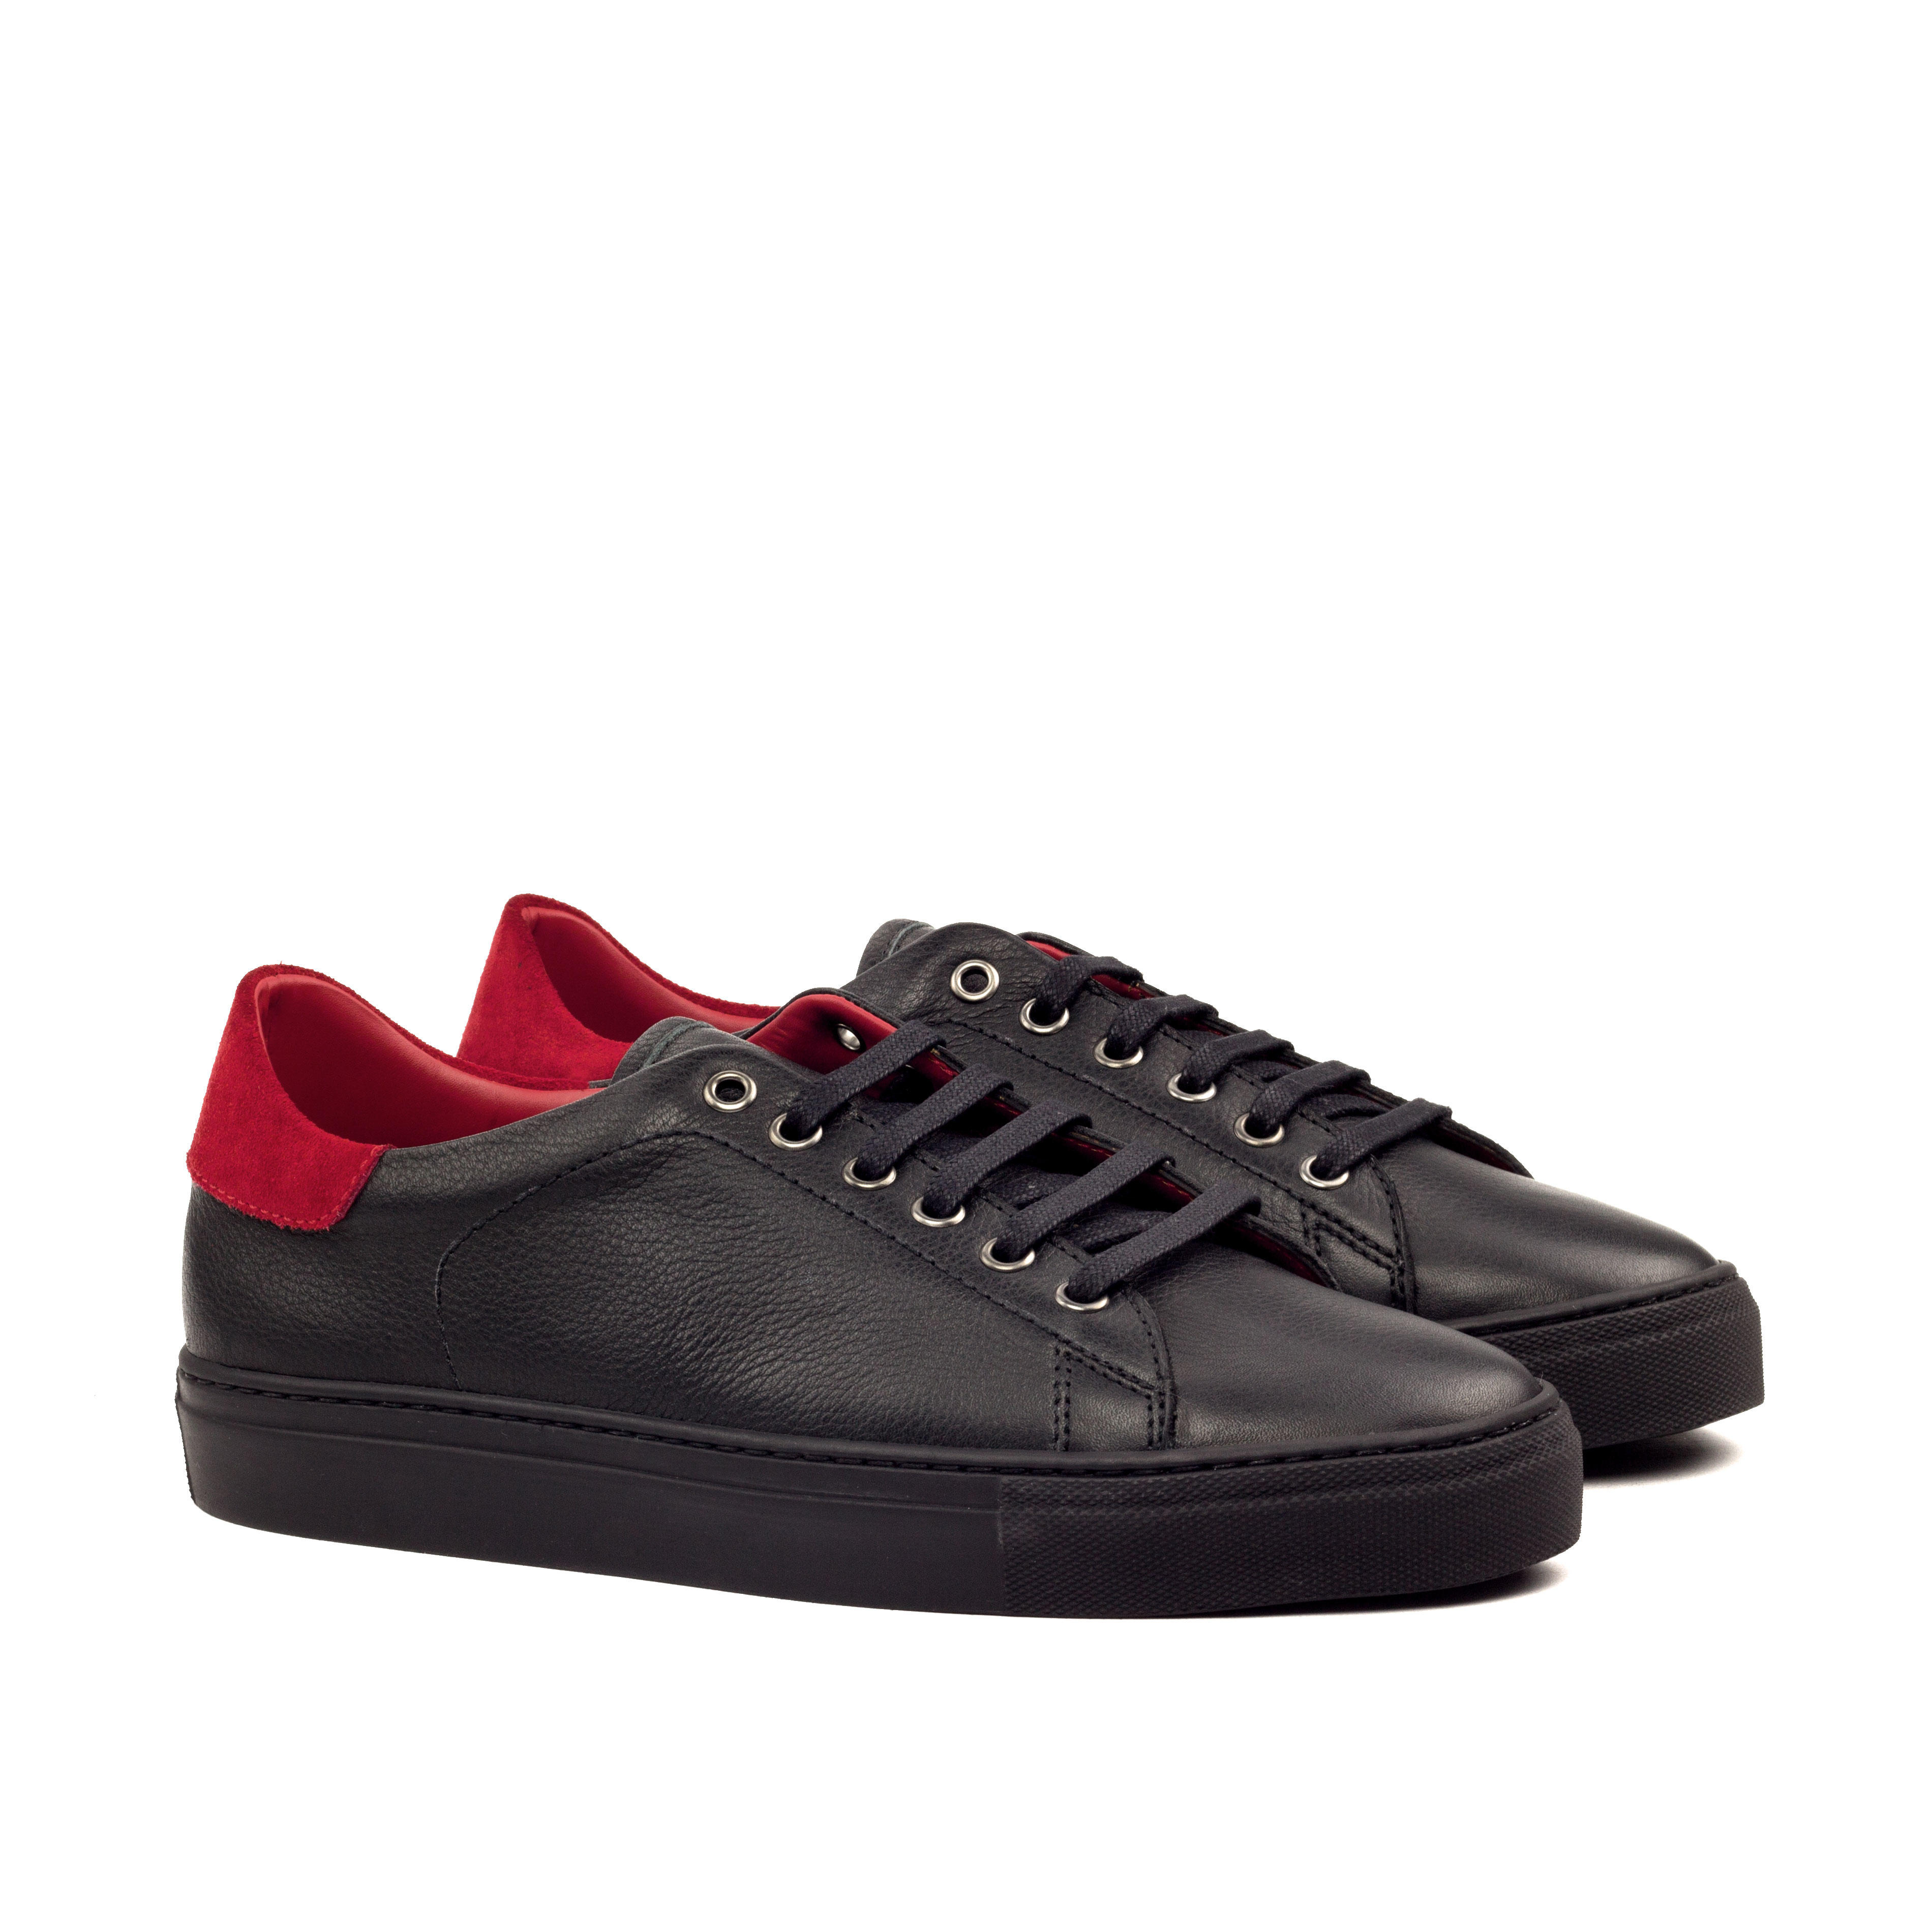 MANOR OF LONDON 'The Perry' Black Full Grain Tennis Trainer Luxury Custom Initials Monogrammed Front Side View